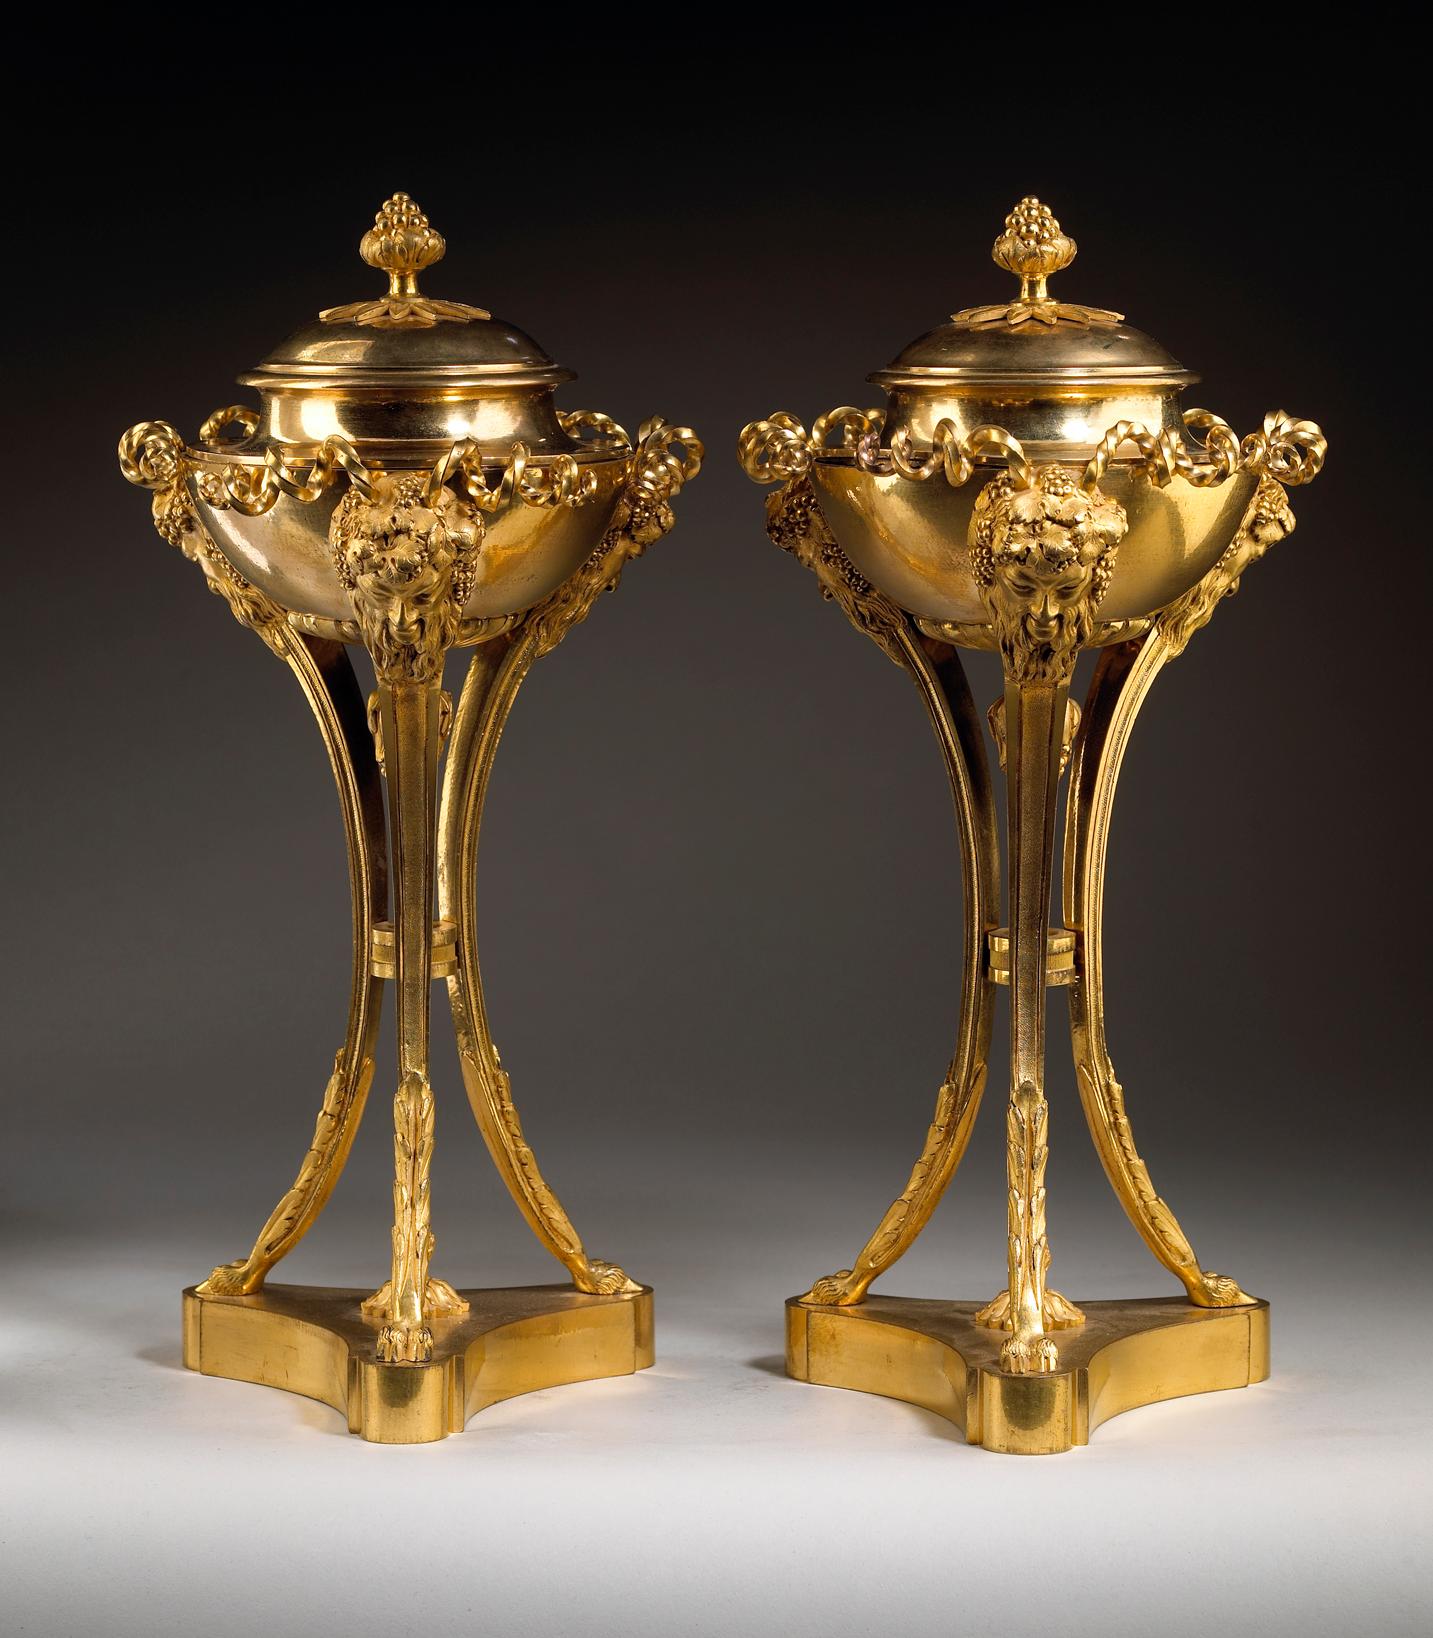 Neoclassical Pair of Louis XVI Gilt Bronze Cassolettes Attributed to Pierre Gouthière